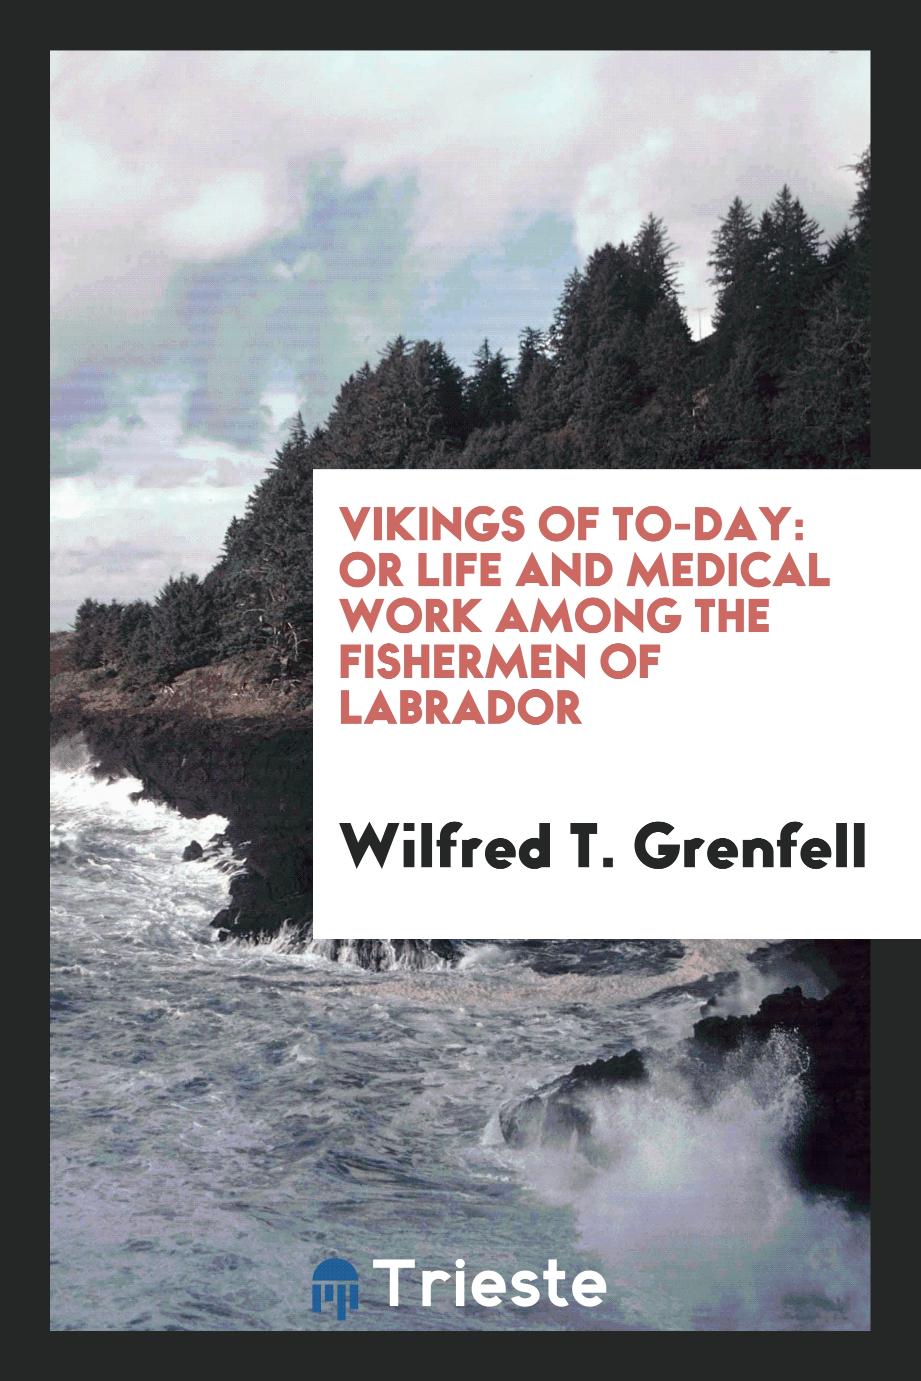 Vikings of to-day: or Life and medical work among the fishermen of Labrador